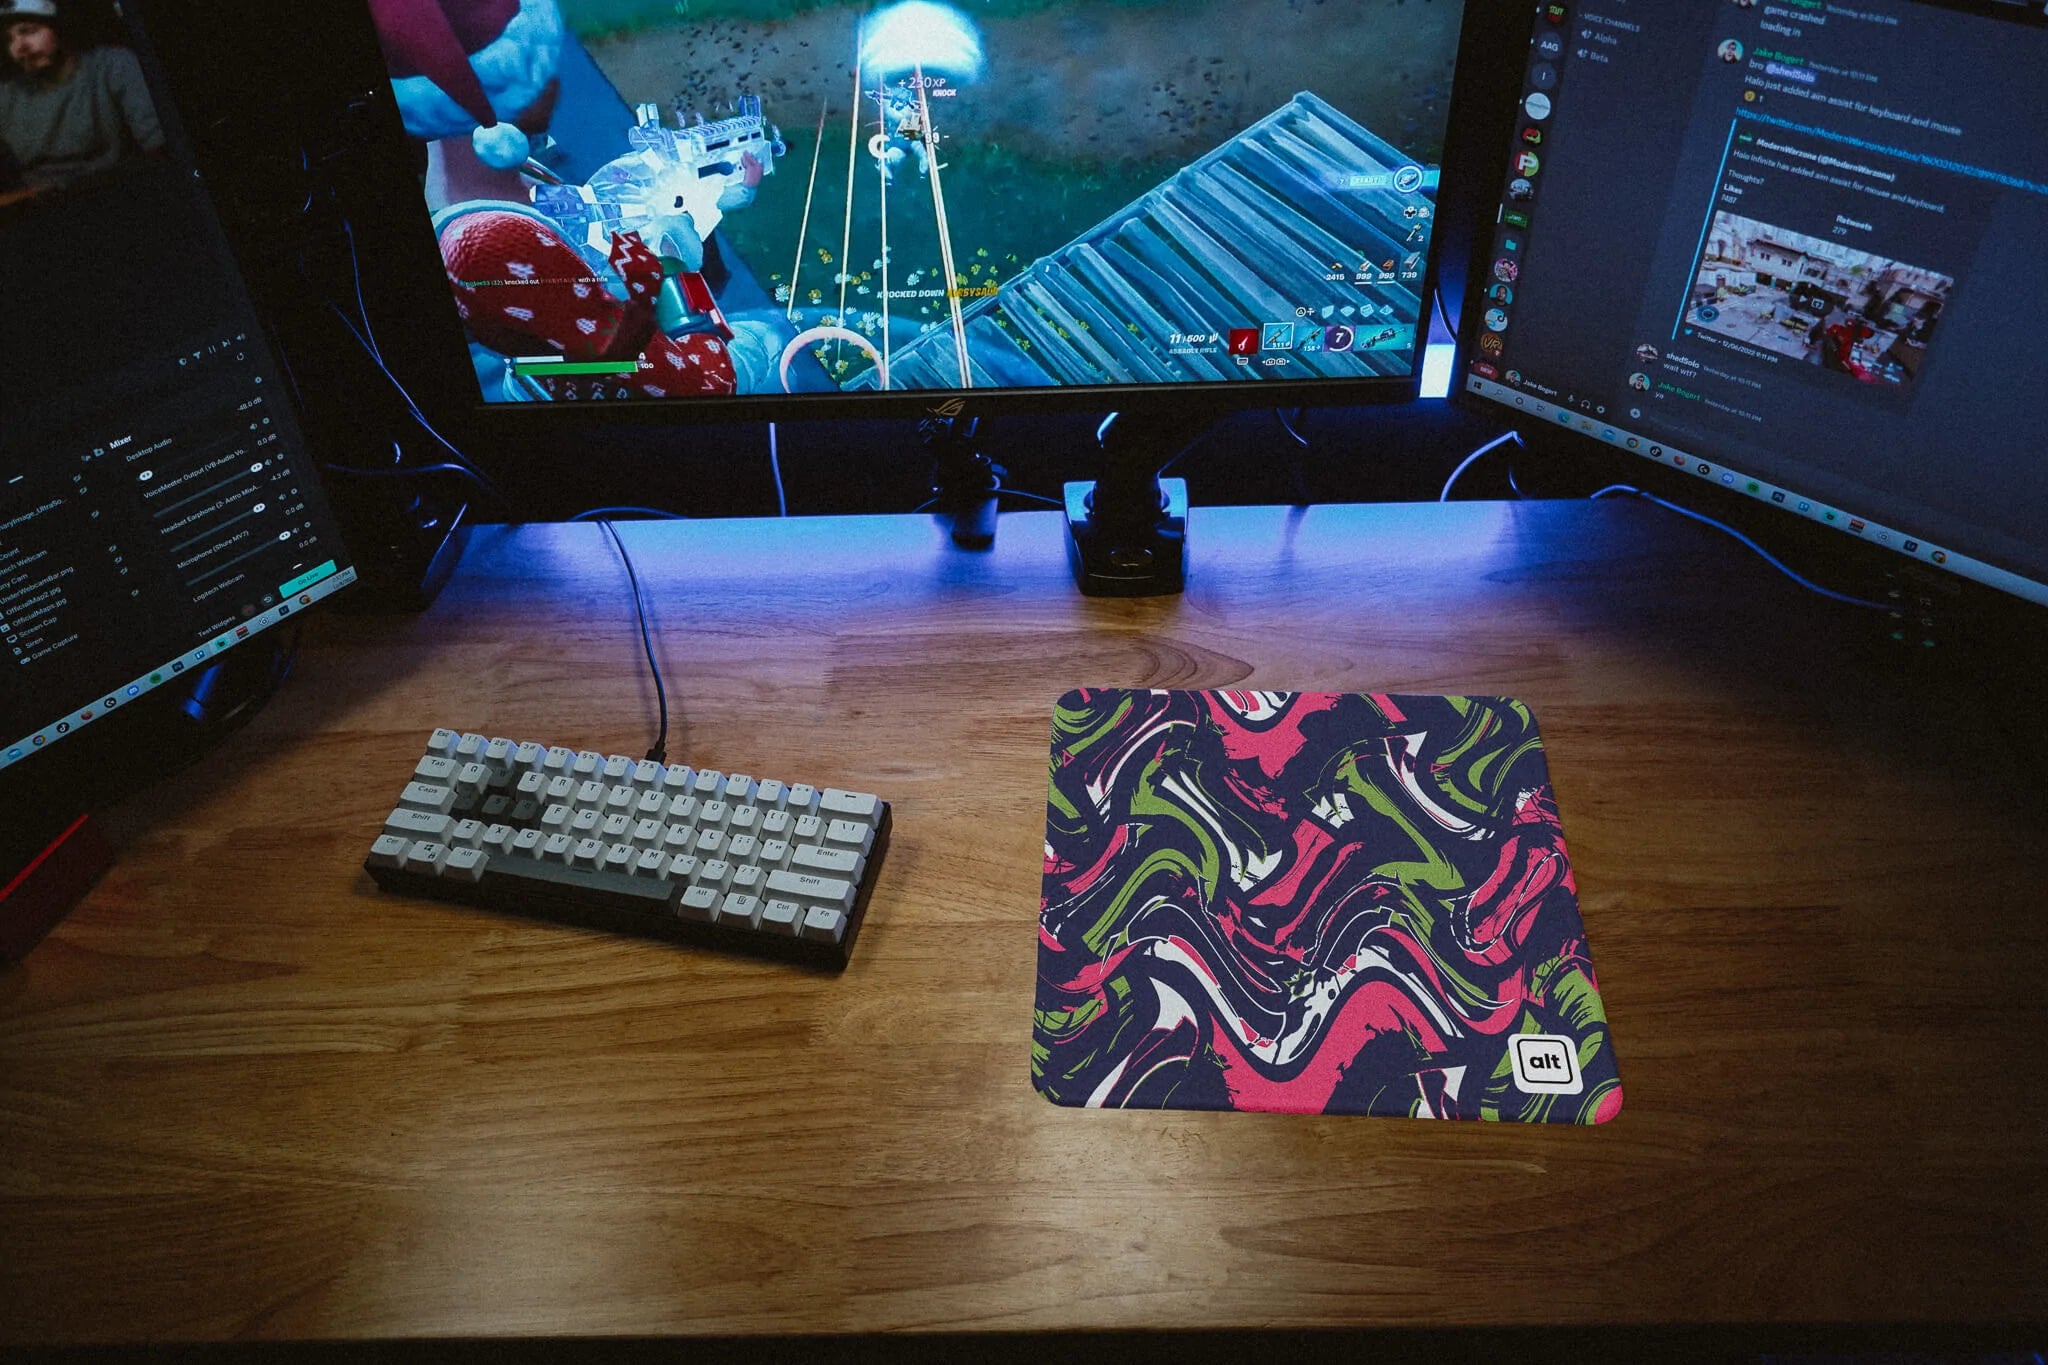 Razzle Smoothie Mousepad - Cinch Gaming